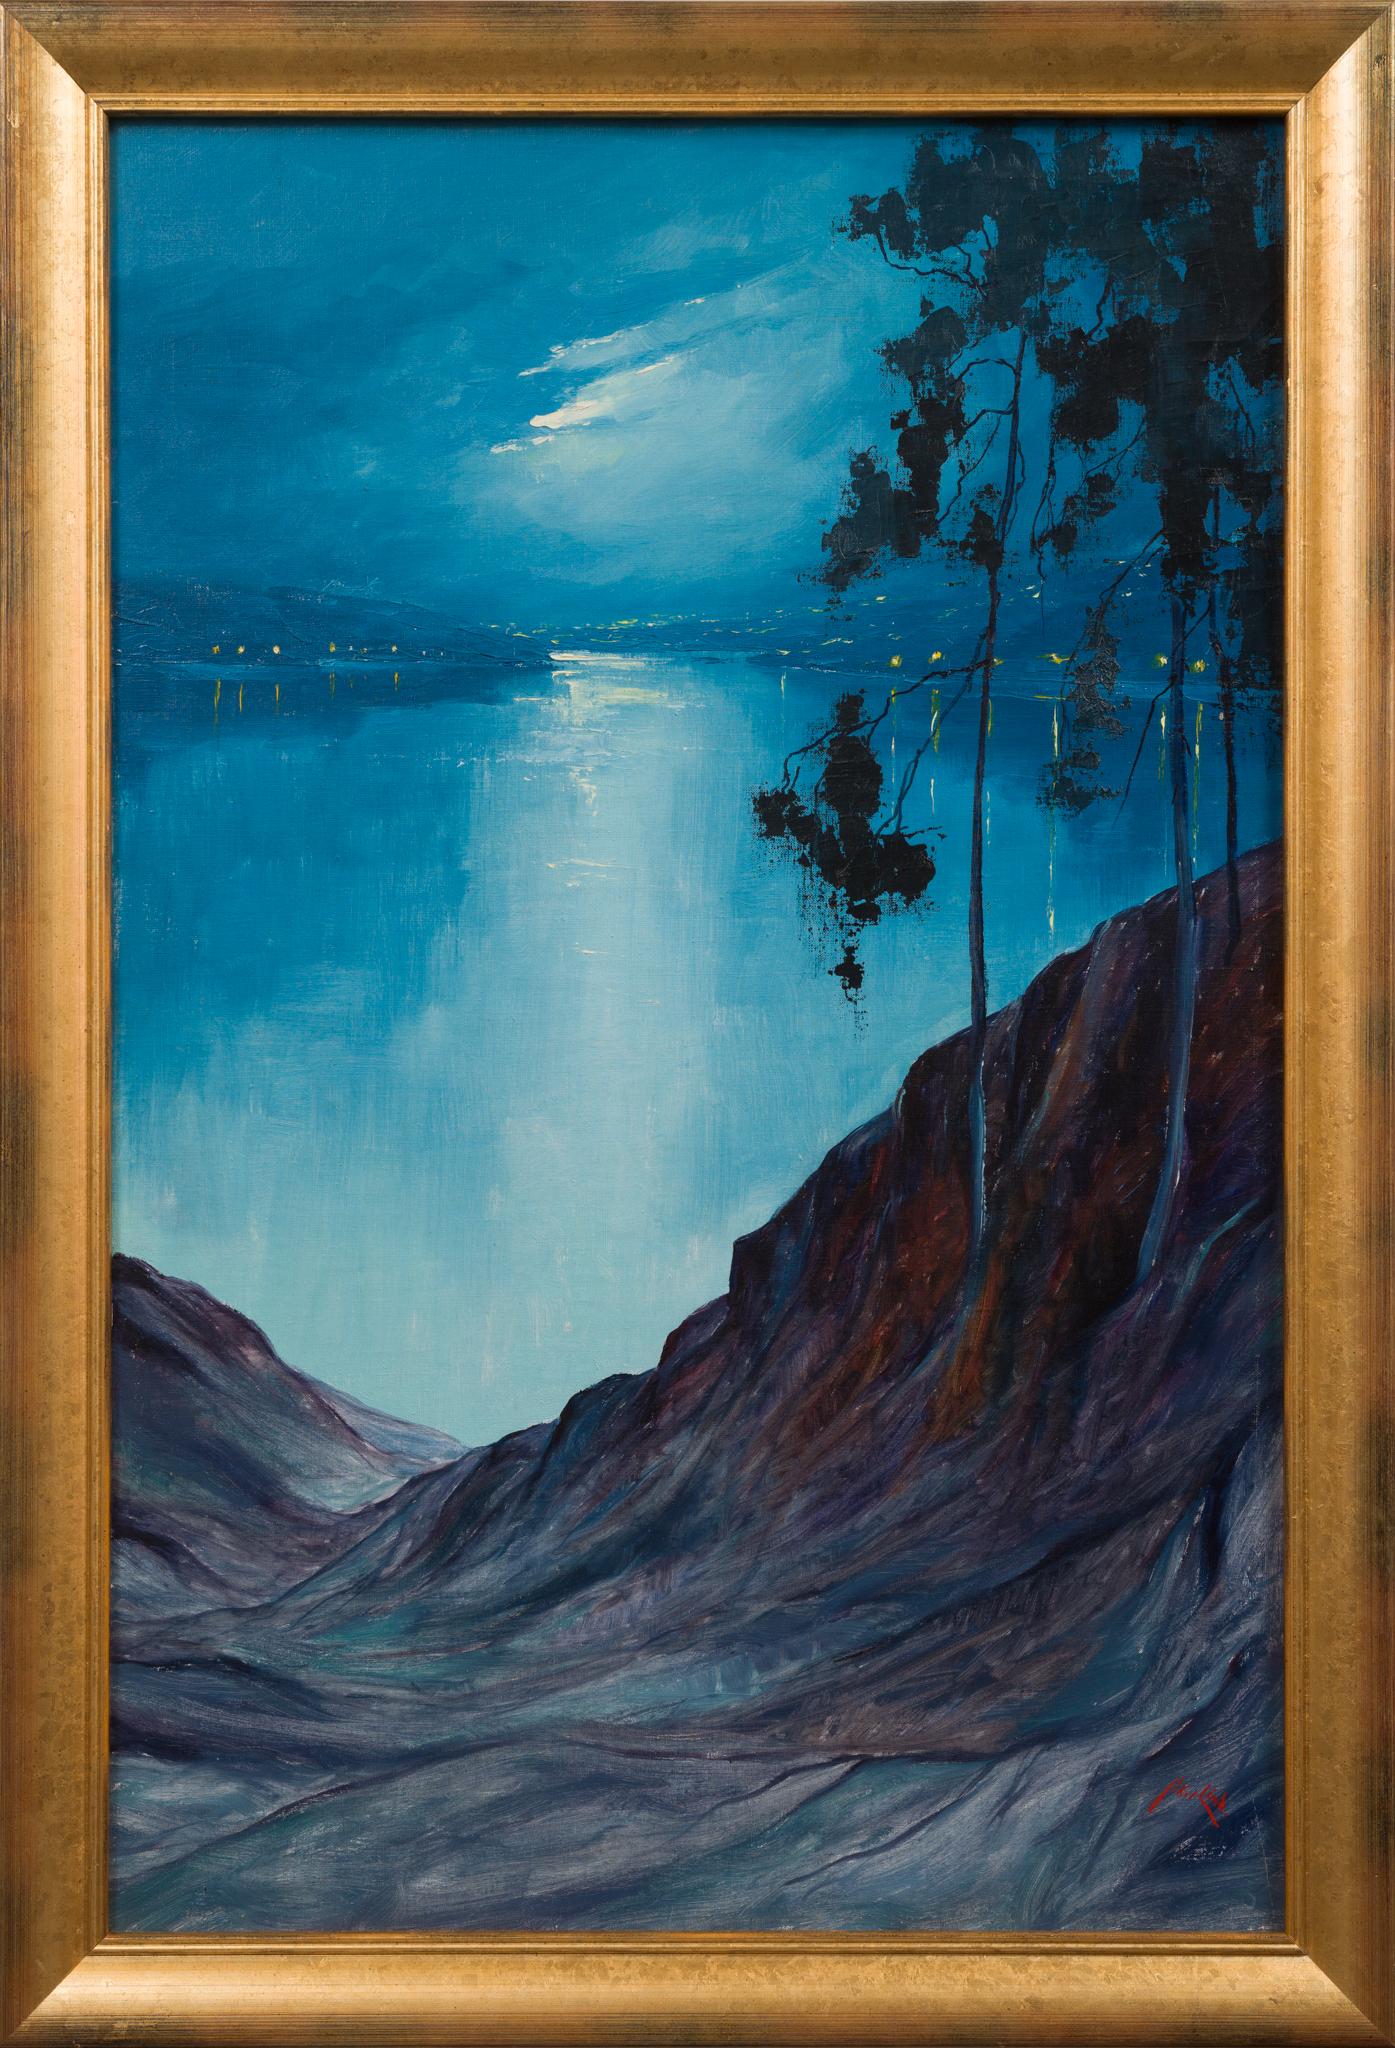 This captivating painting by the Swedish-Danish artist Axel Lind offers a serene and introspective view from the artist's studio on Lidingö, Stockholm. The composition skillfully draws the viewer's eye from the rugged cliffs and slender trees in the